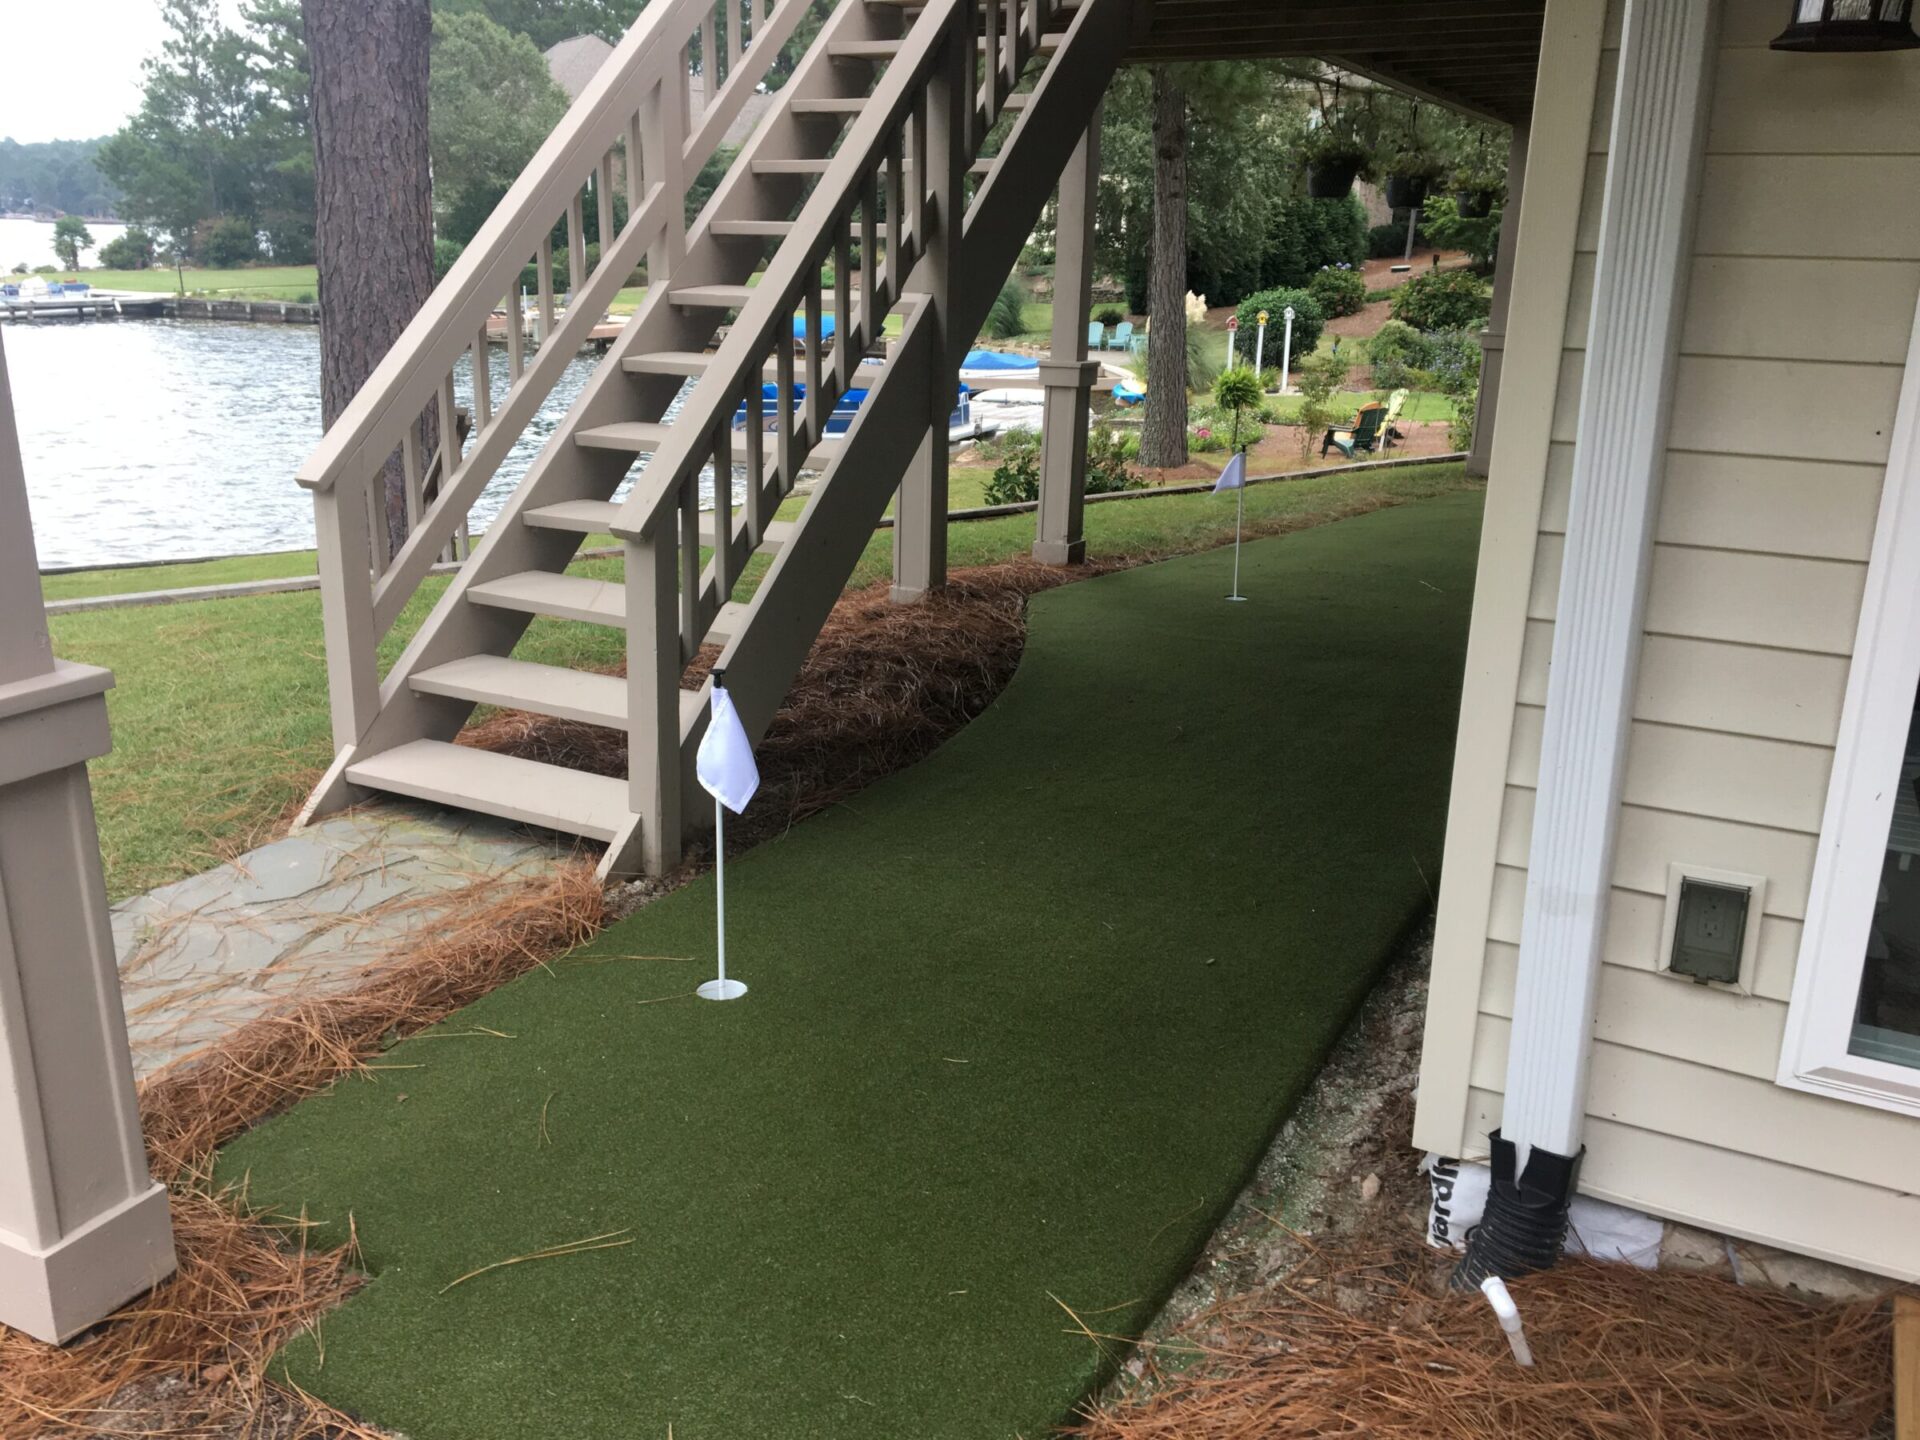 A backyard putting green alongside a house with stairs leading to a dock, flagsticks in holes, pine straw borders, and a lake view.